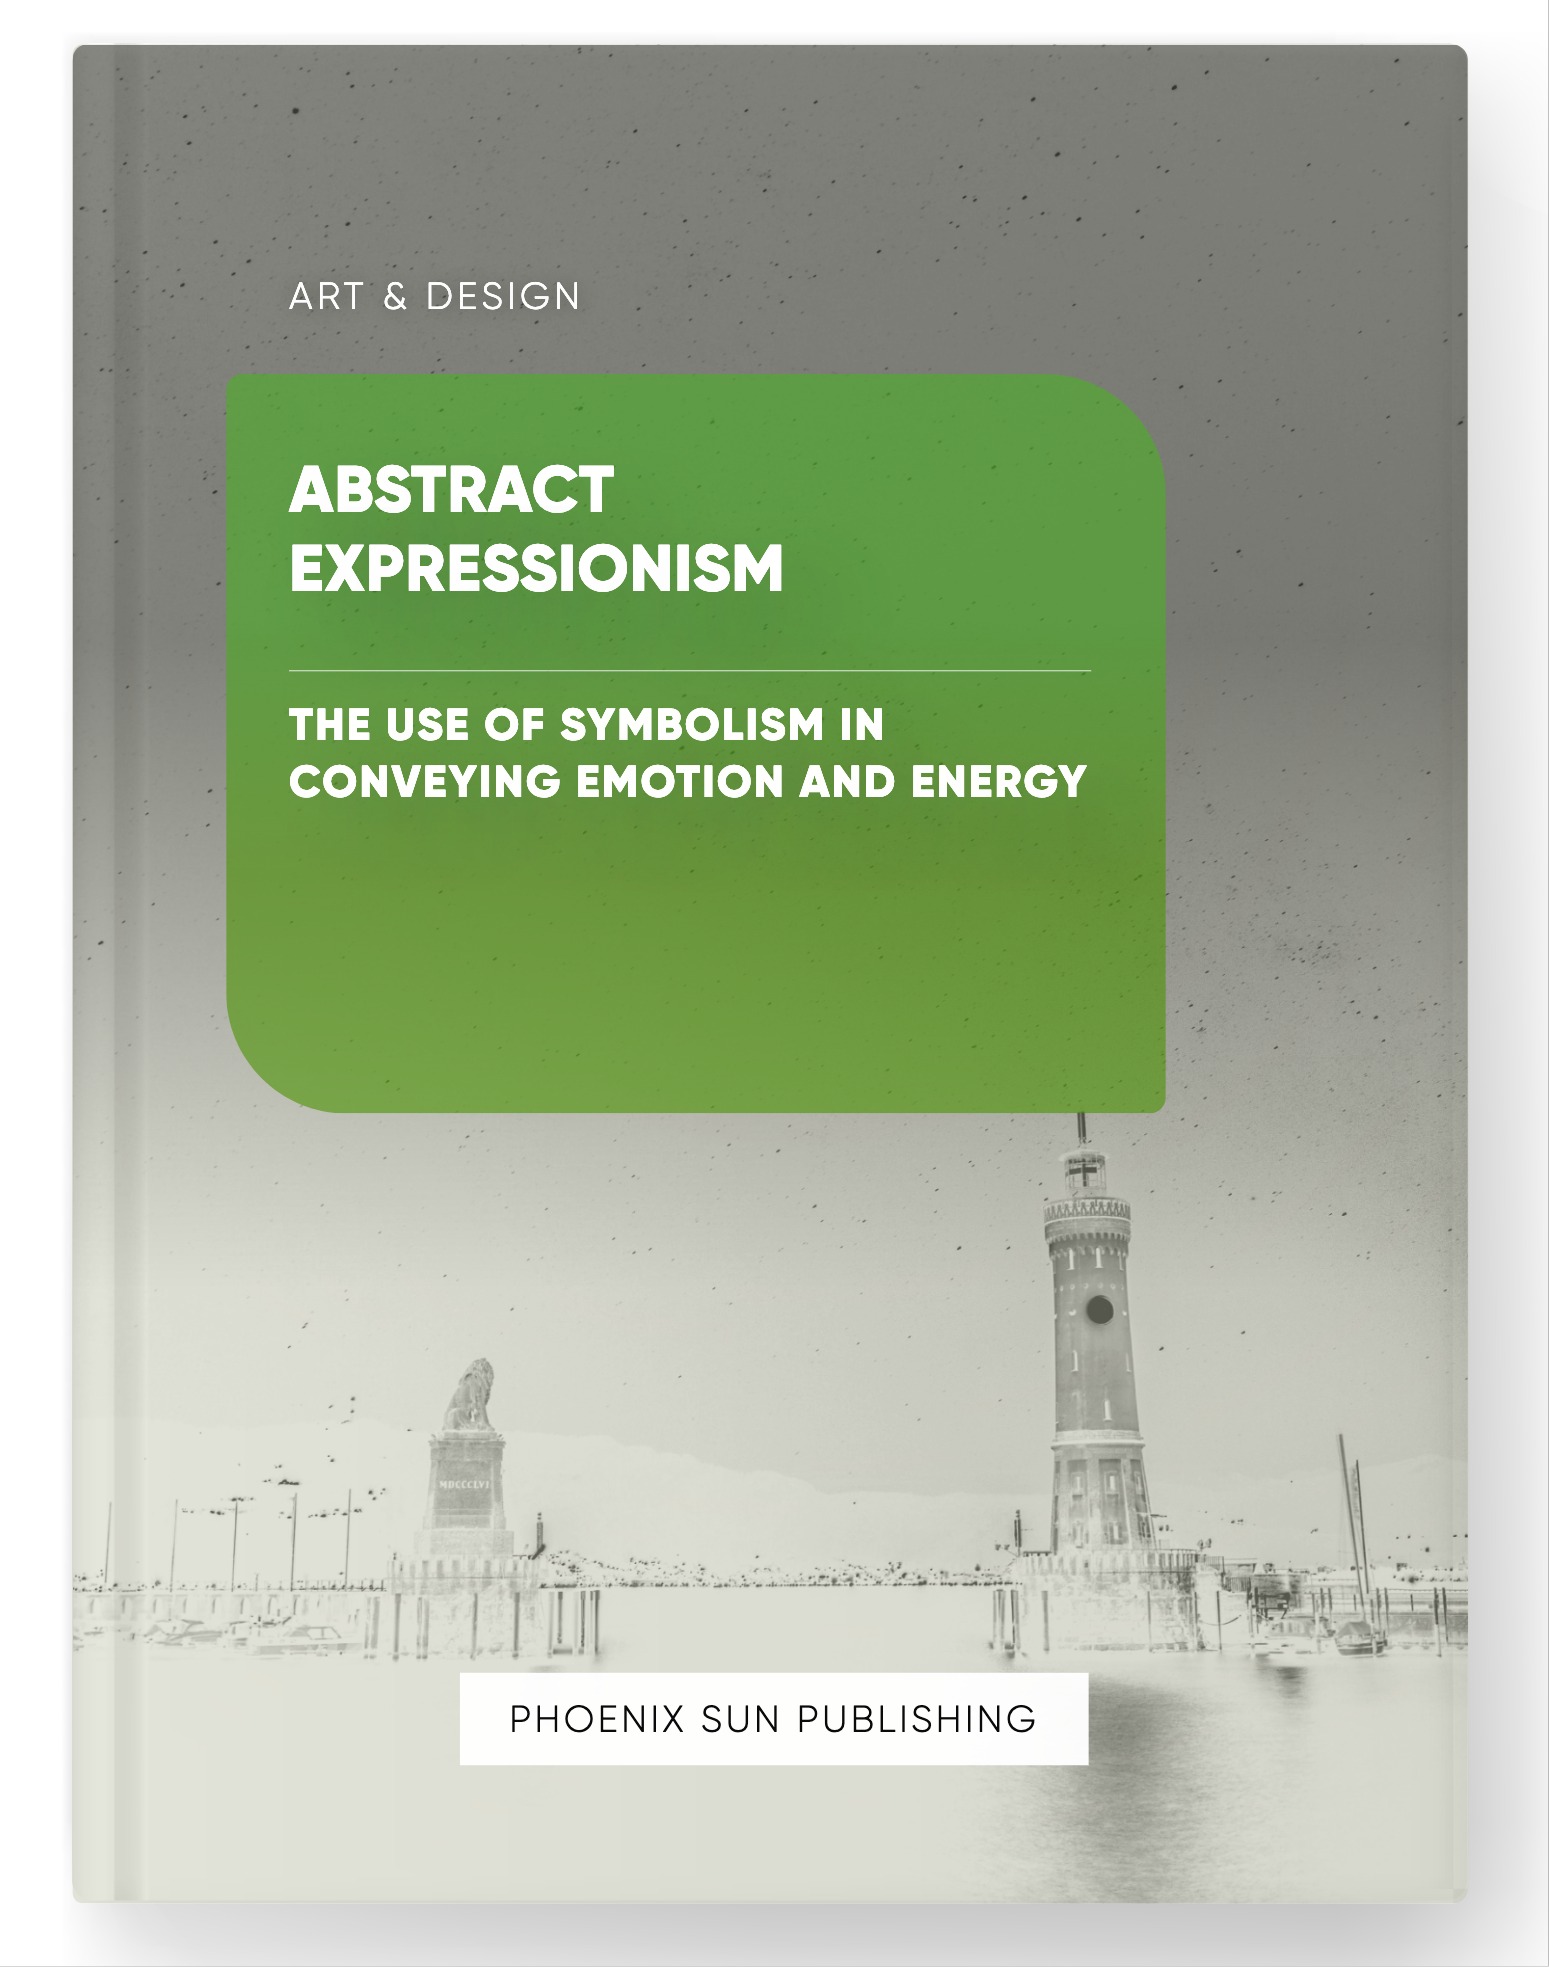 Abstract Expressionism – The Use of Symbolism in Conveying Emotion and Energy